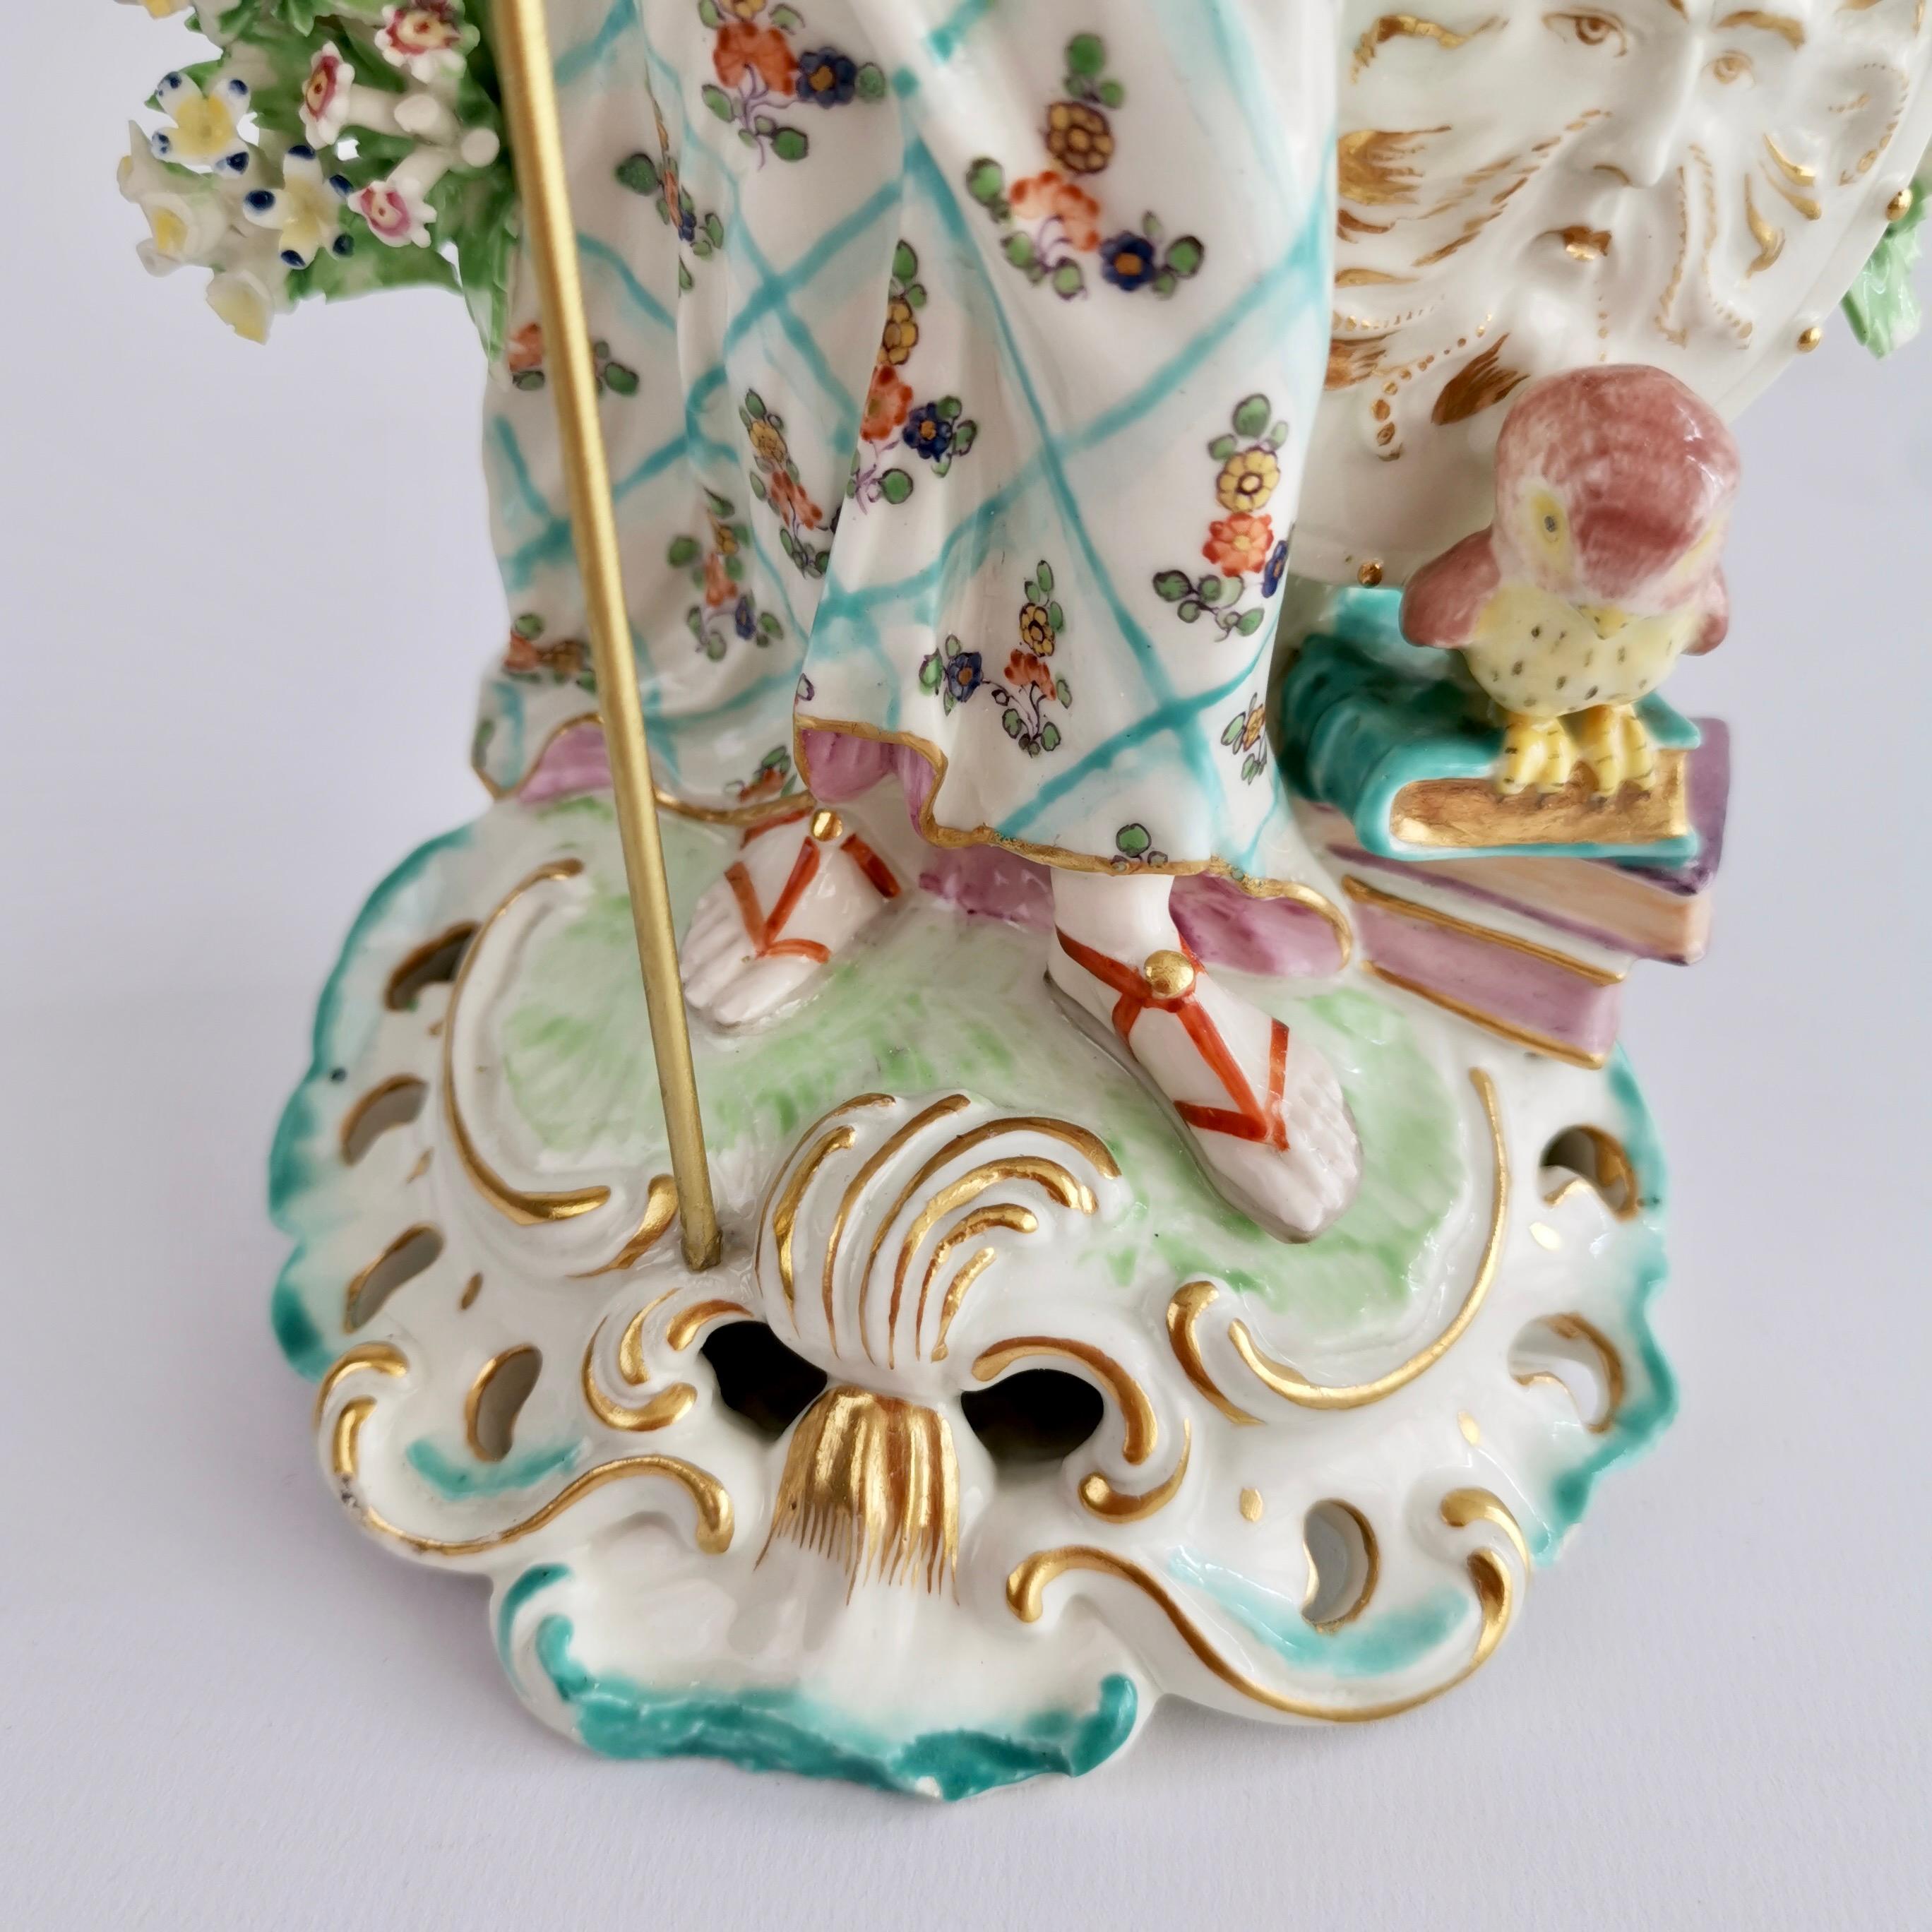 Derby Porcelain Figure of Minerva with Owl, Rococo Ca 1765 4